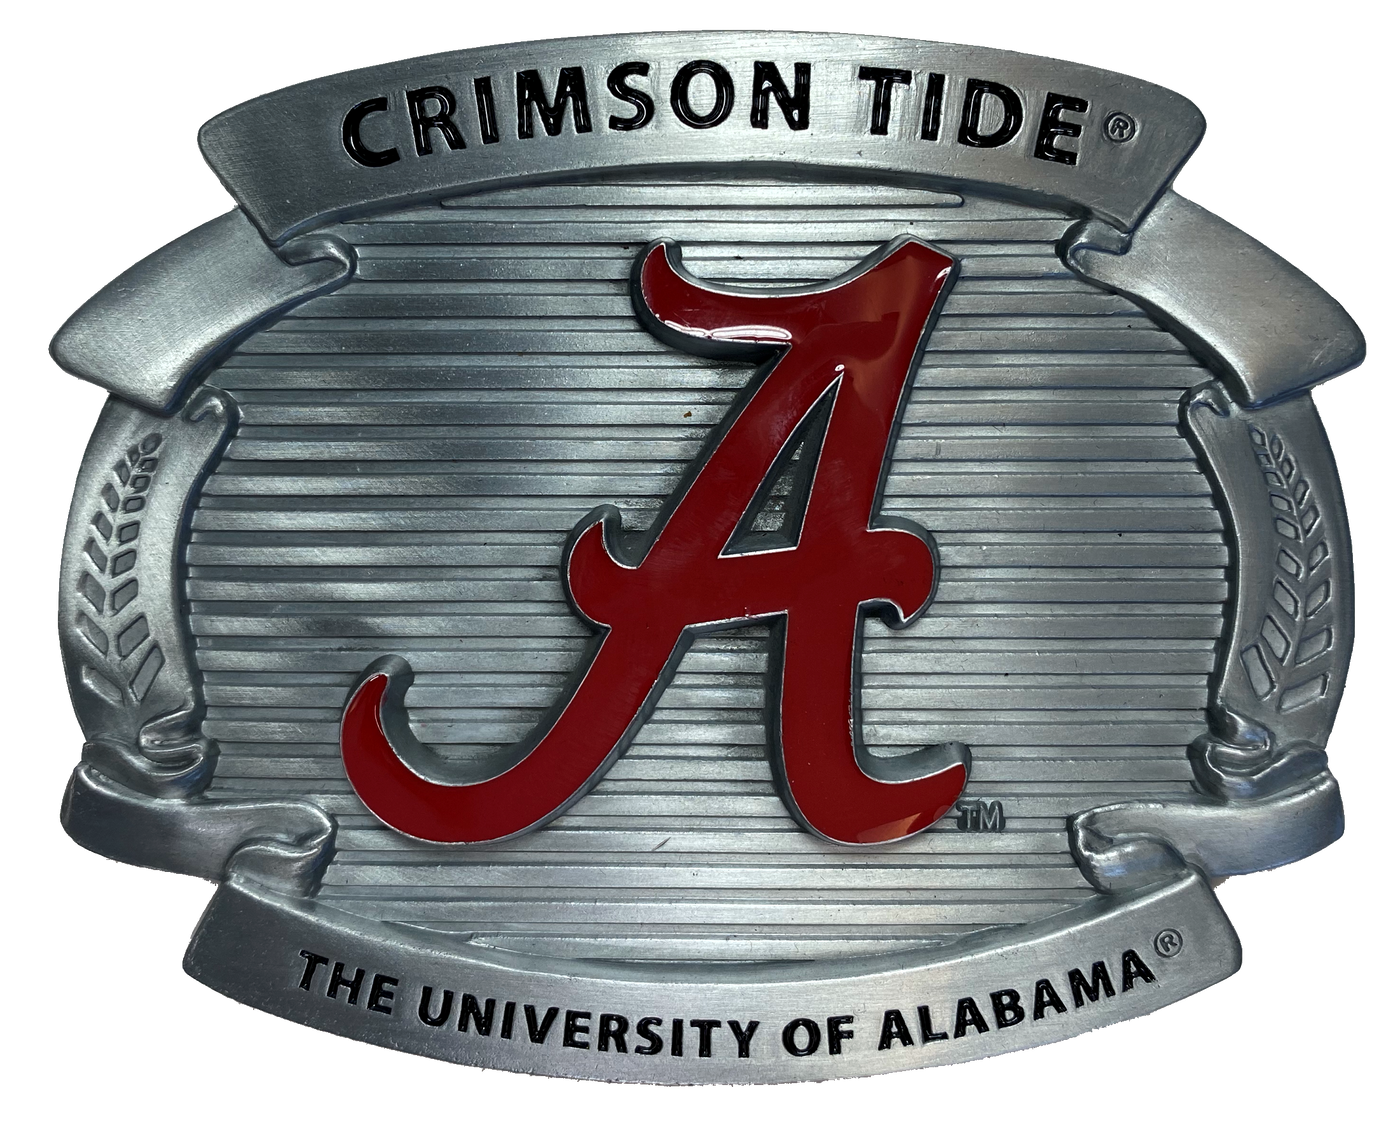 Show everyone you are a SEC BAMA fan! Pewter with epoxy filled red "A" logo symbol of the University of Alabama, A slightly oversized for the super fan! Fits any of our 1 1/2" belts.